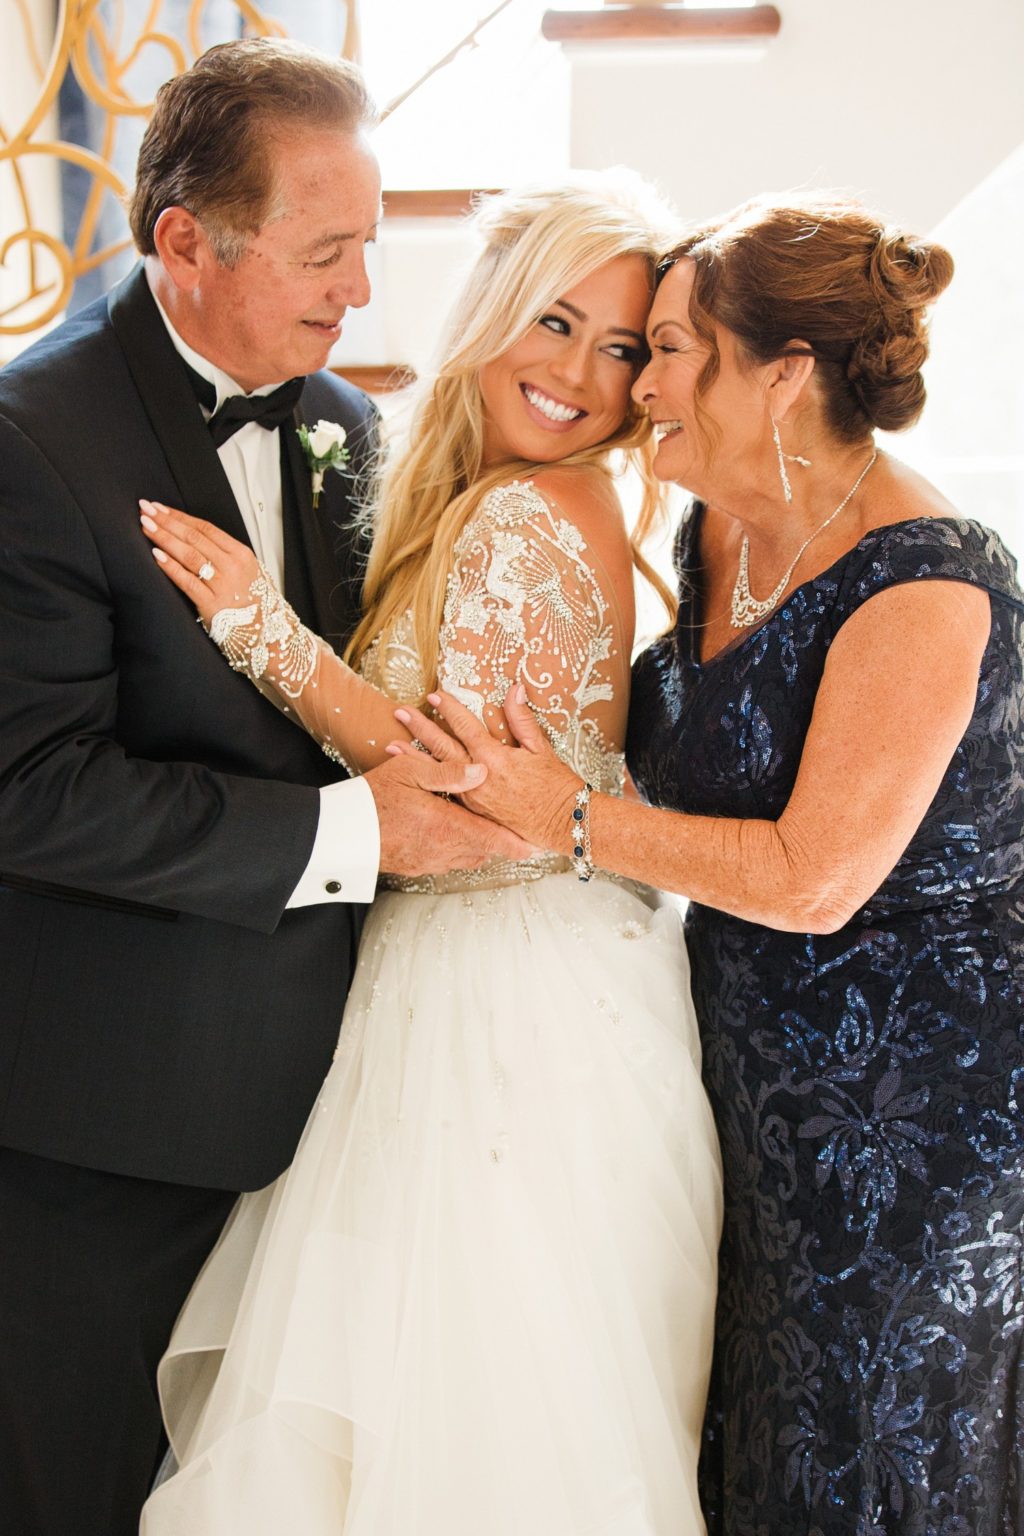 Exclusive Interview with Sabrina Bryan on Her Wedding, Married Life ...